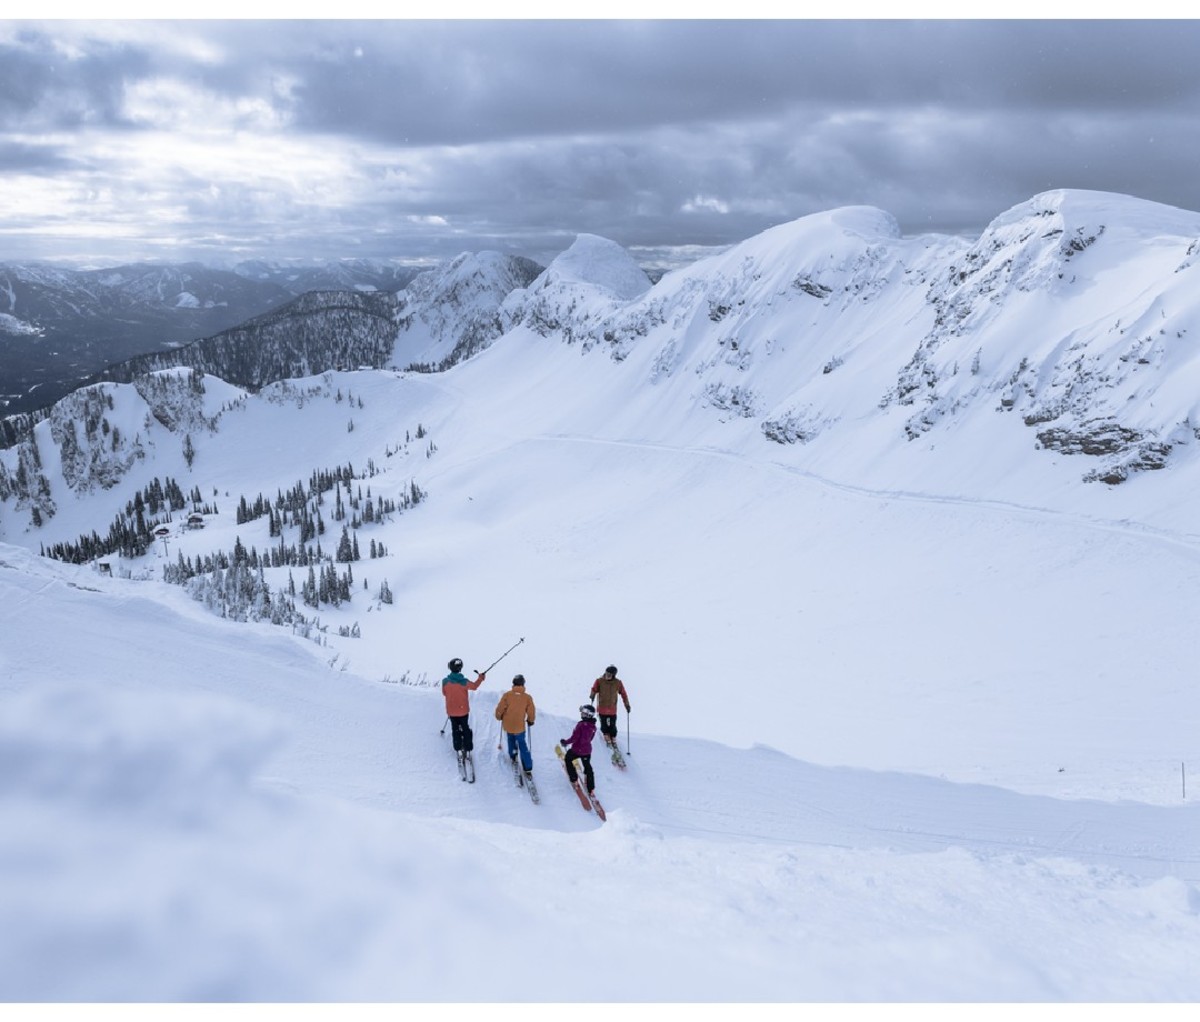 Group of four skiers on the mountain at Fernie Alpine Resort.